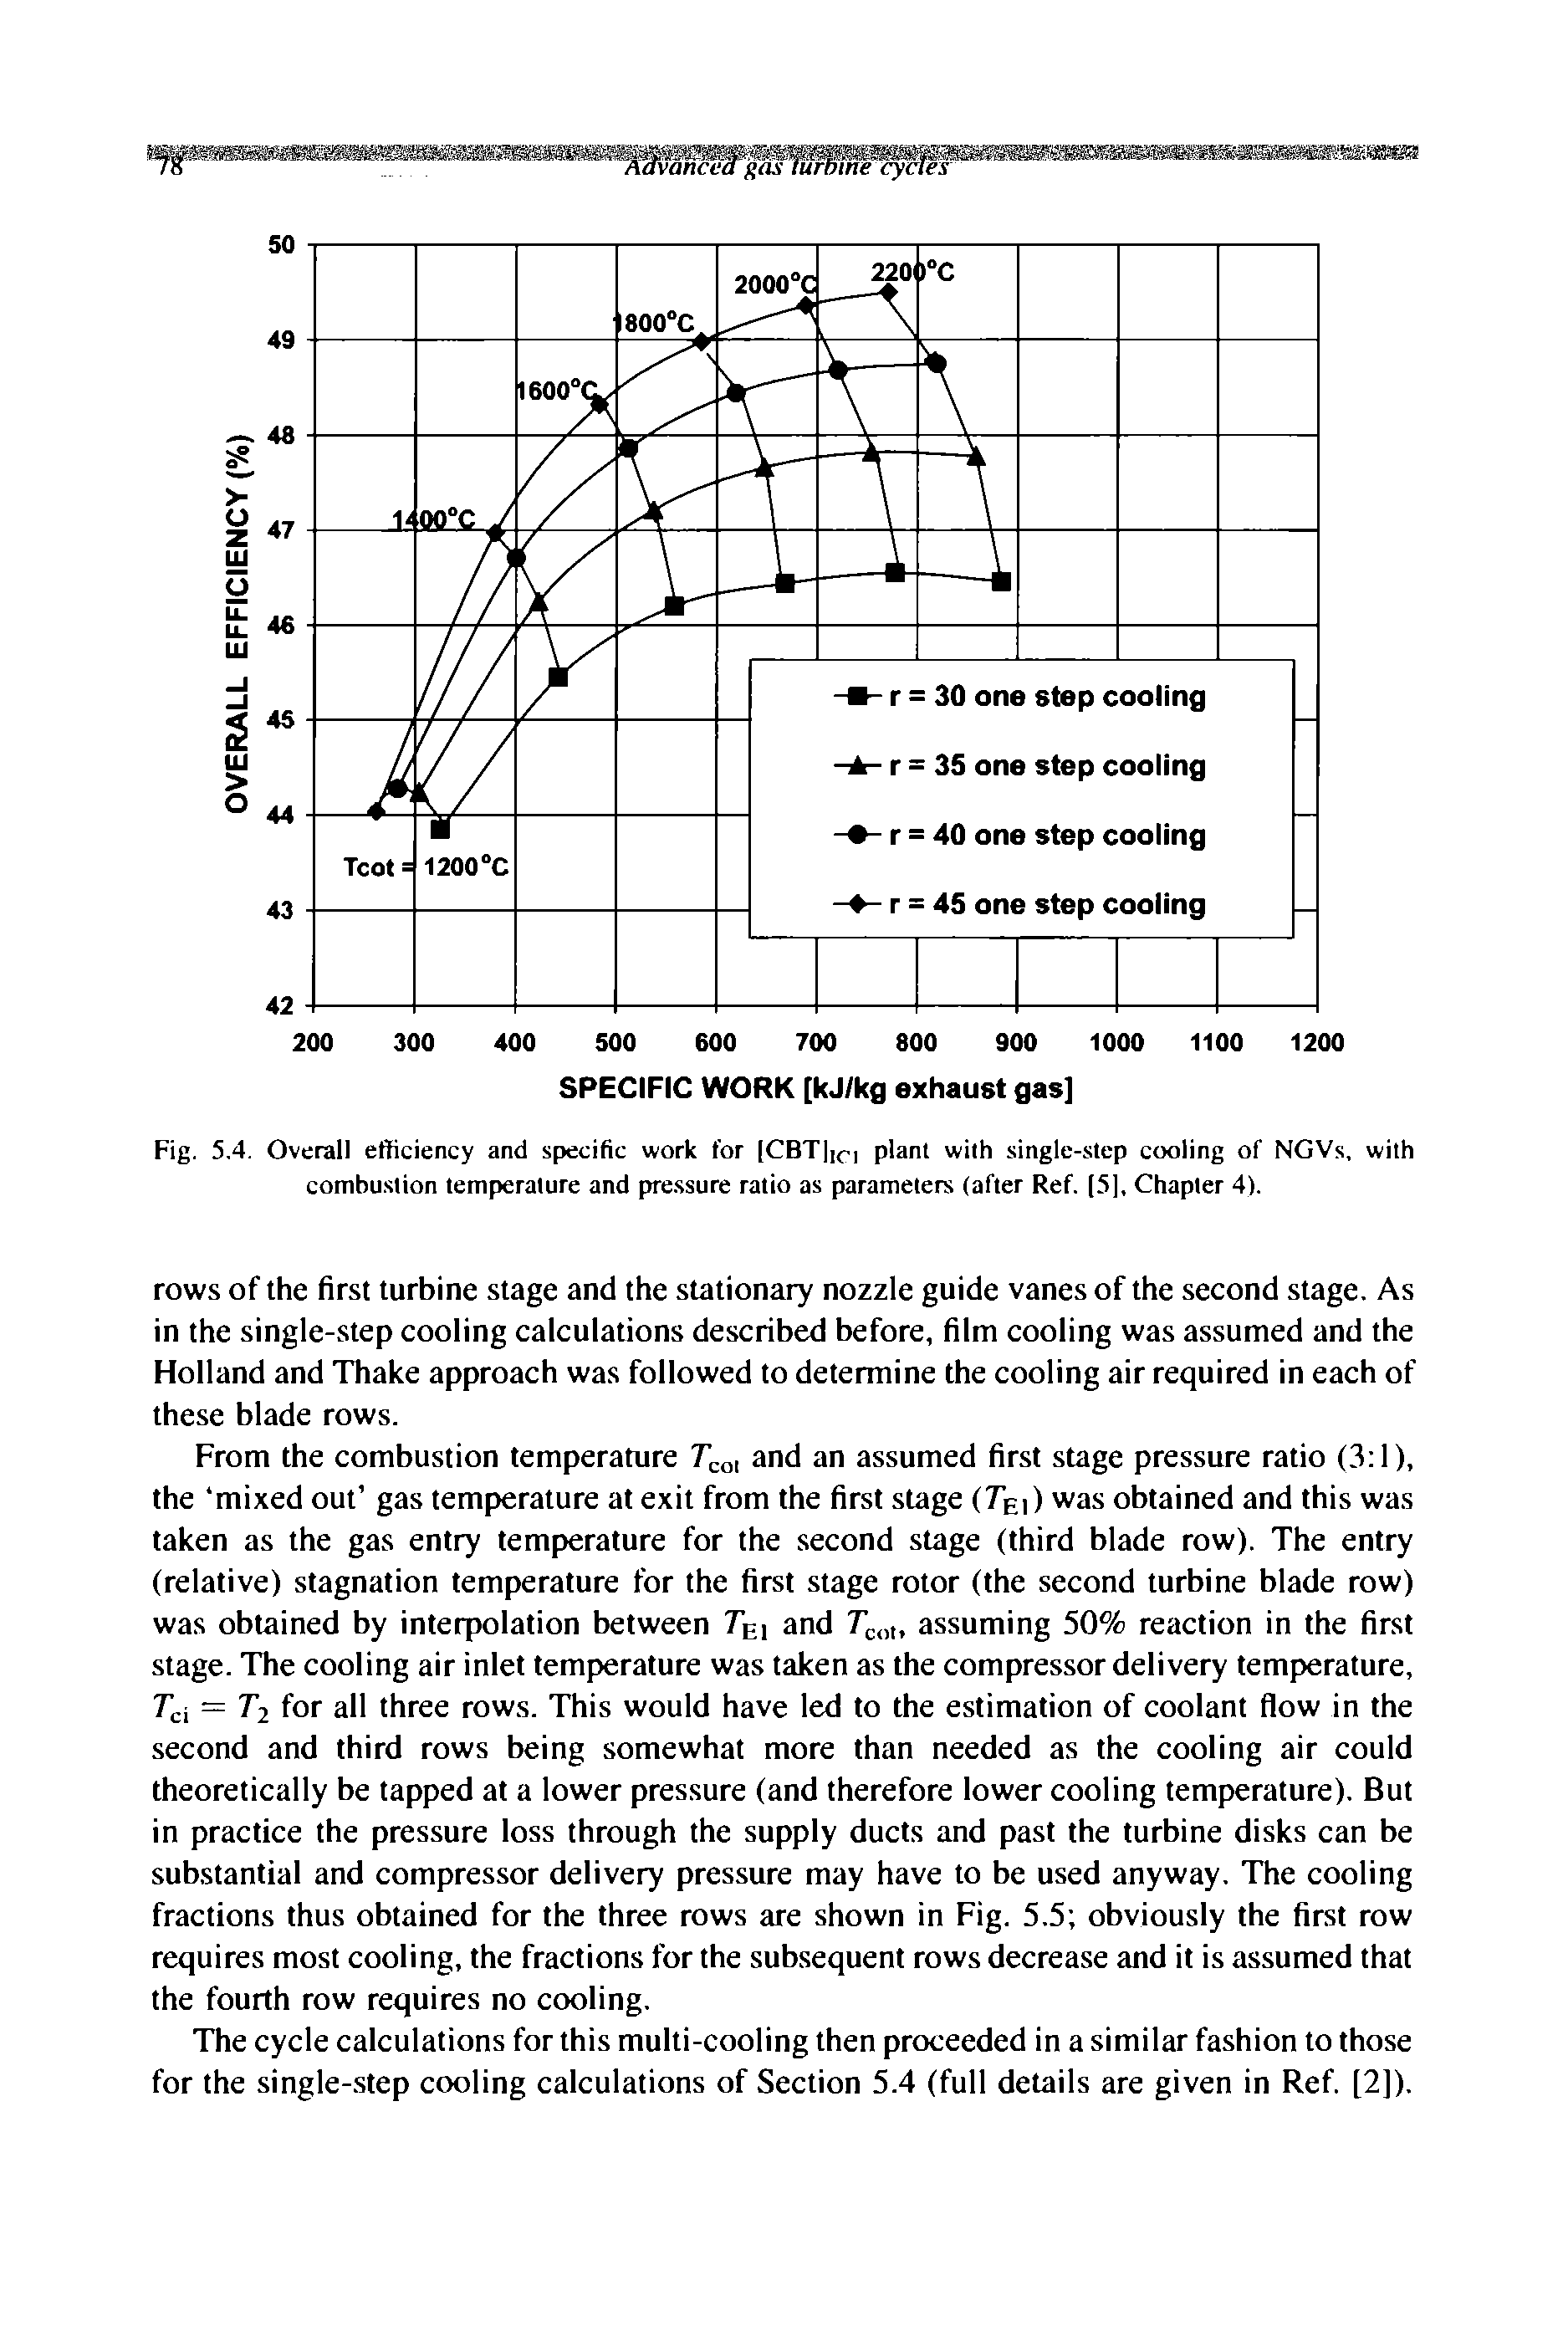 Fig. 5,4. Overall efficiency and specific work for [CBTli<-i plant with single-step cooling of NGVs, with combustion temperature and pressure ratio as parameters (after Ref. [5], Chapter 4).